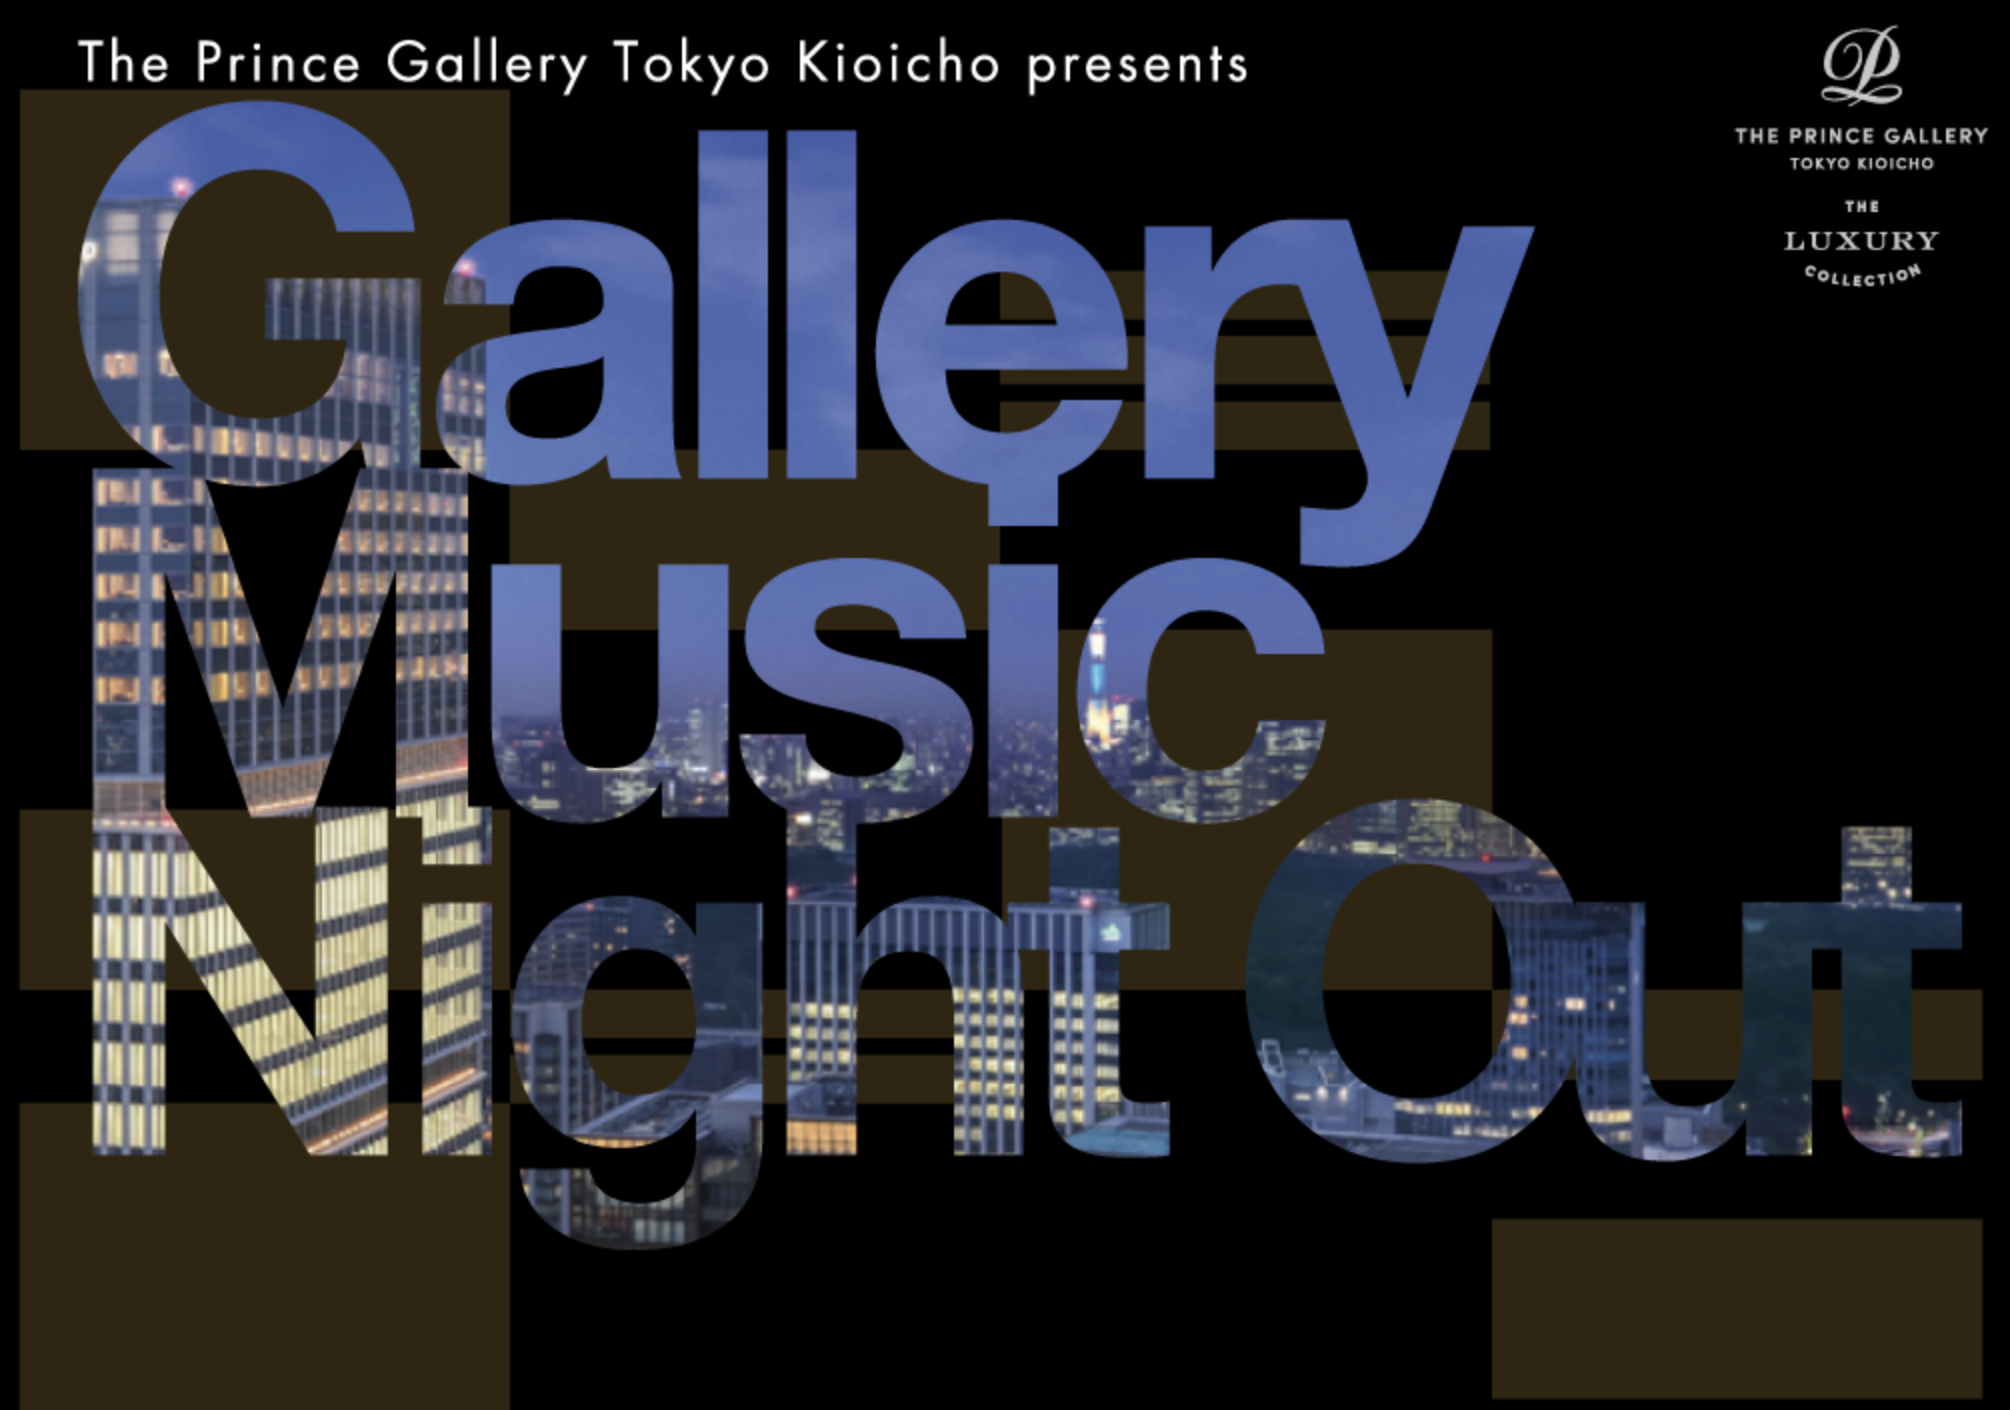 2019/8/9(fri) Gallery Music Night Out @ The Prince Gallery